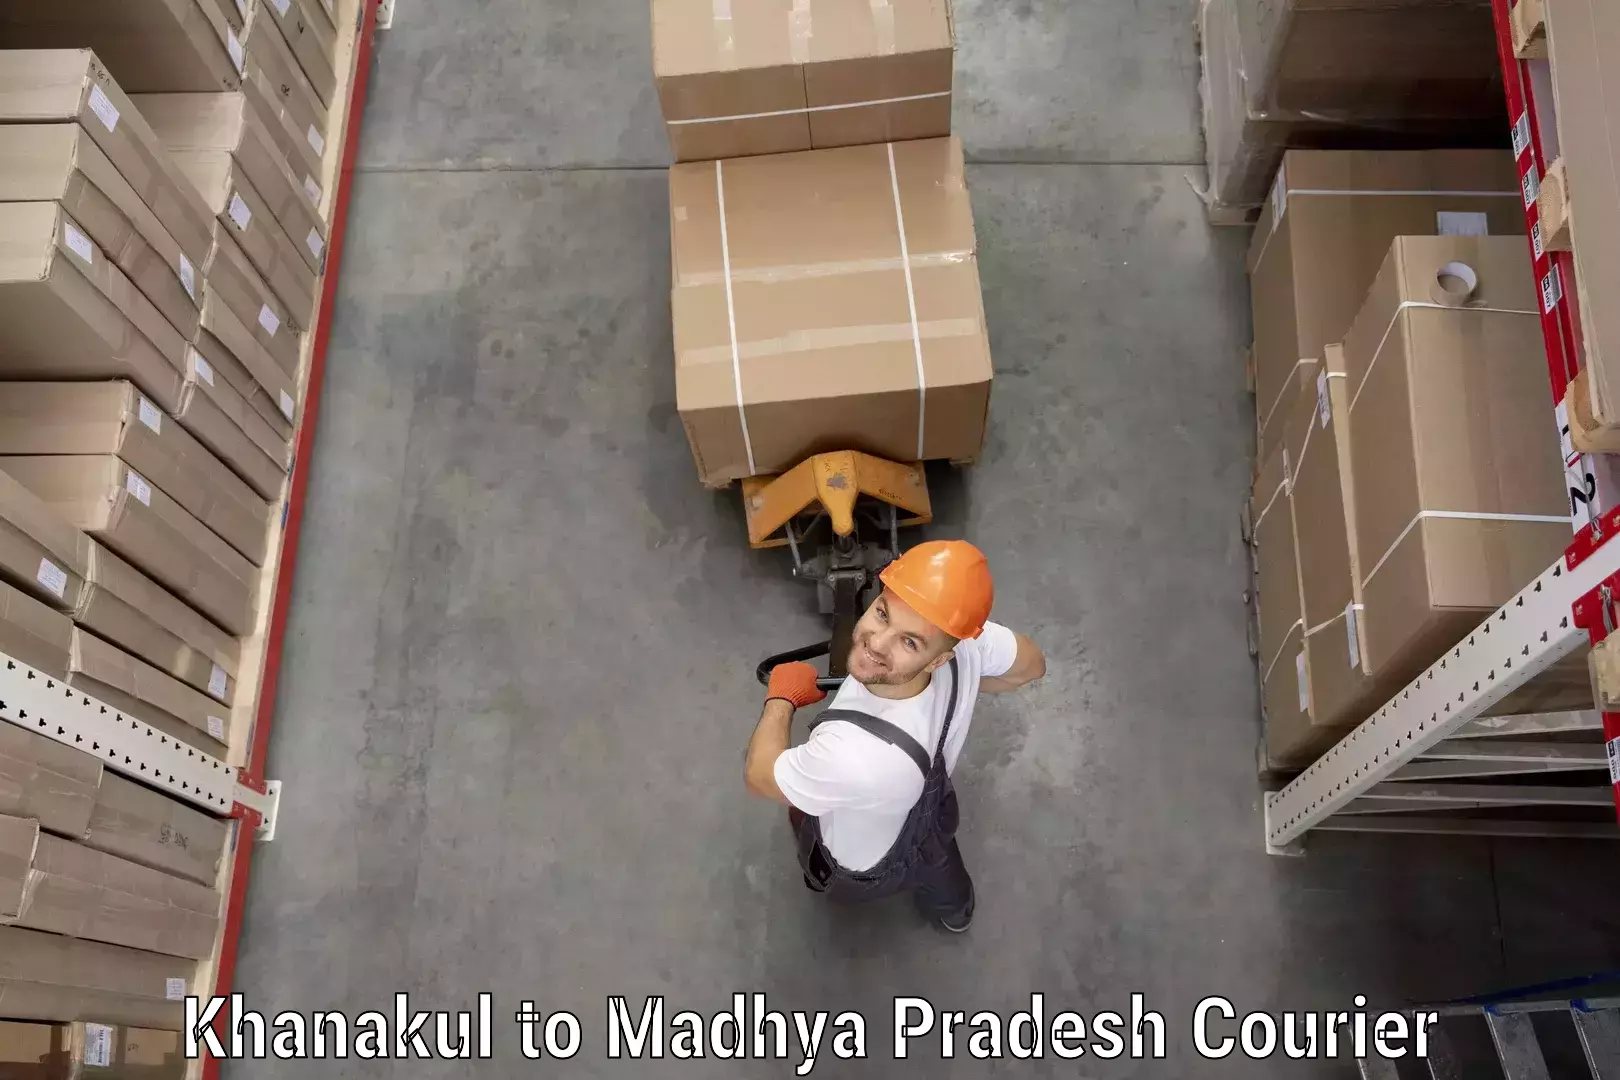 Easy access courier services Khanakul to Madhya Pradesh